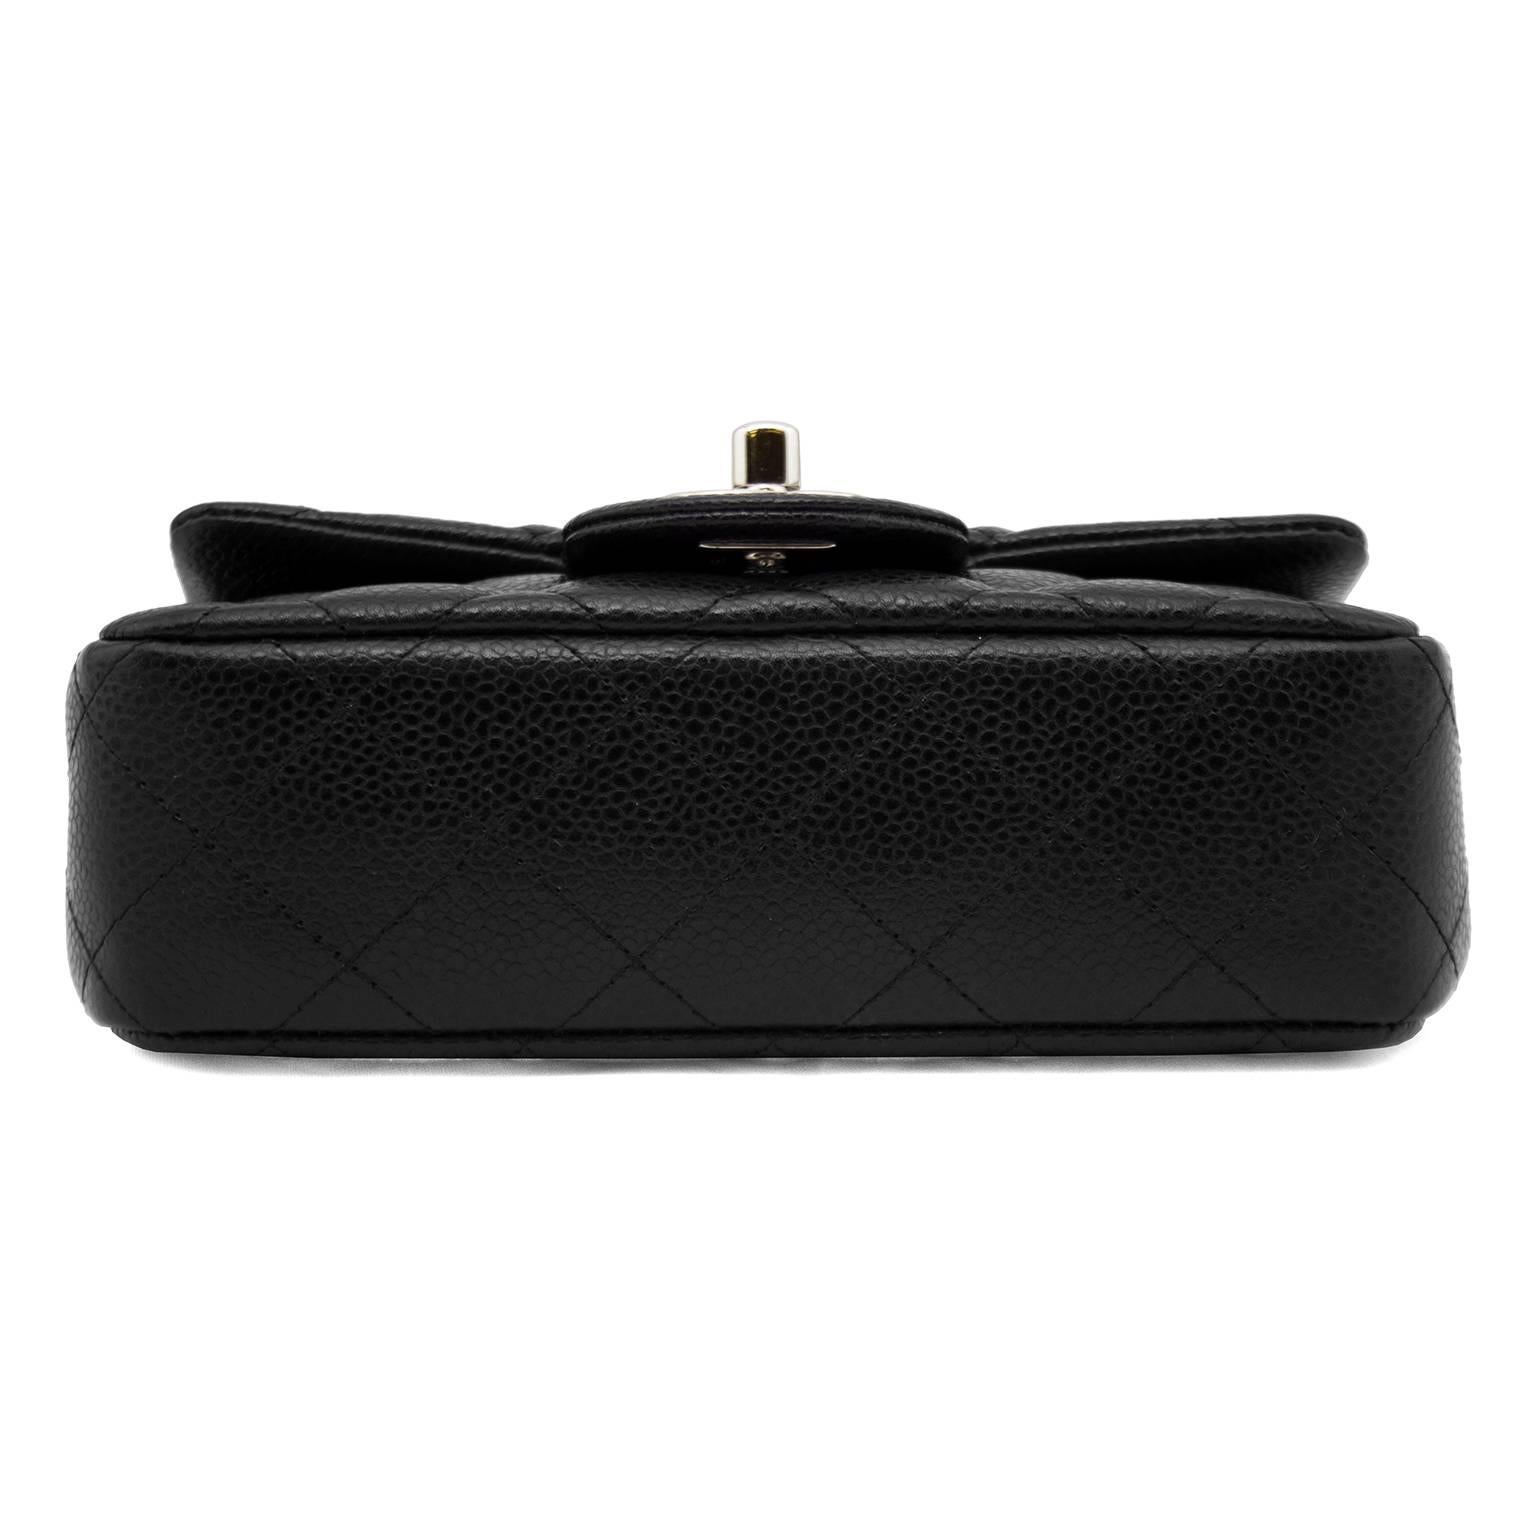 2013 Chanel Black Quilted Caviar Leather Chanel Classic Mini Flap Bag 1